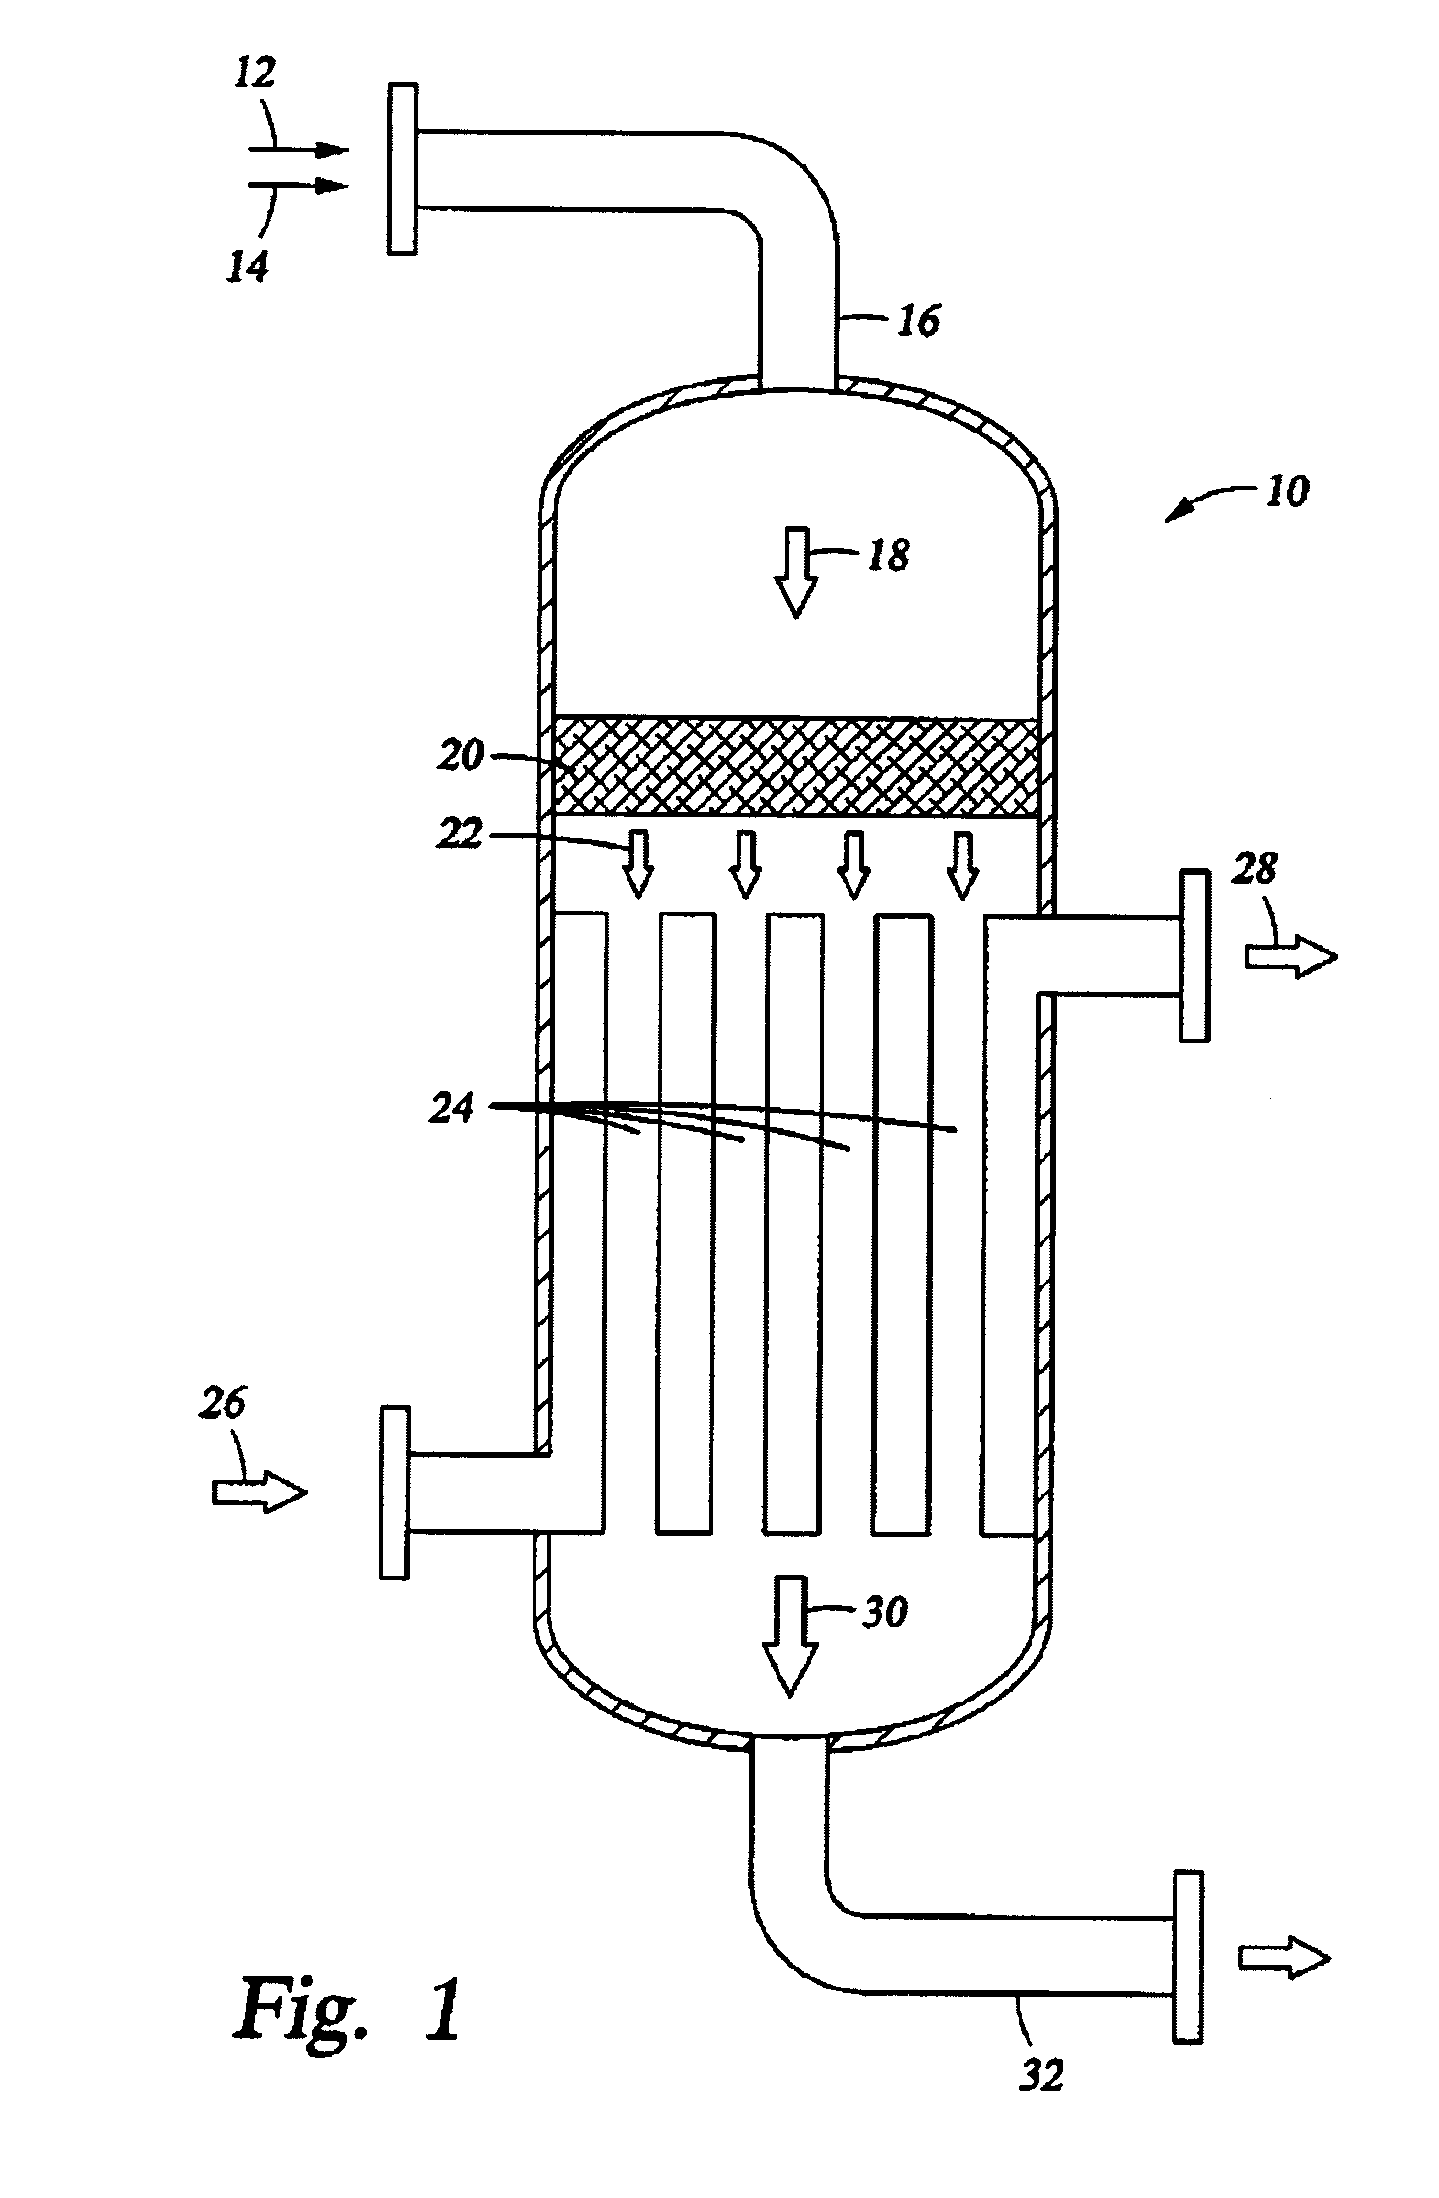 Synthesis gas process comprising partial oxidation using controlled and optimized temperature profile